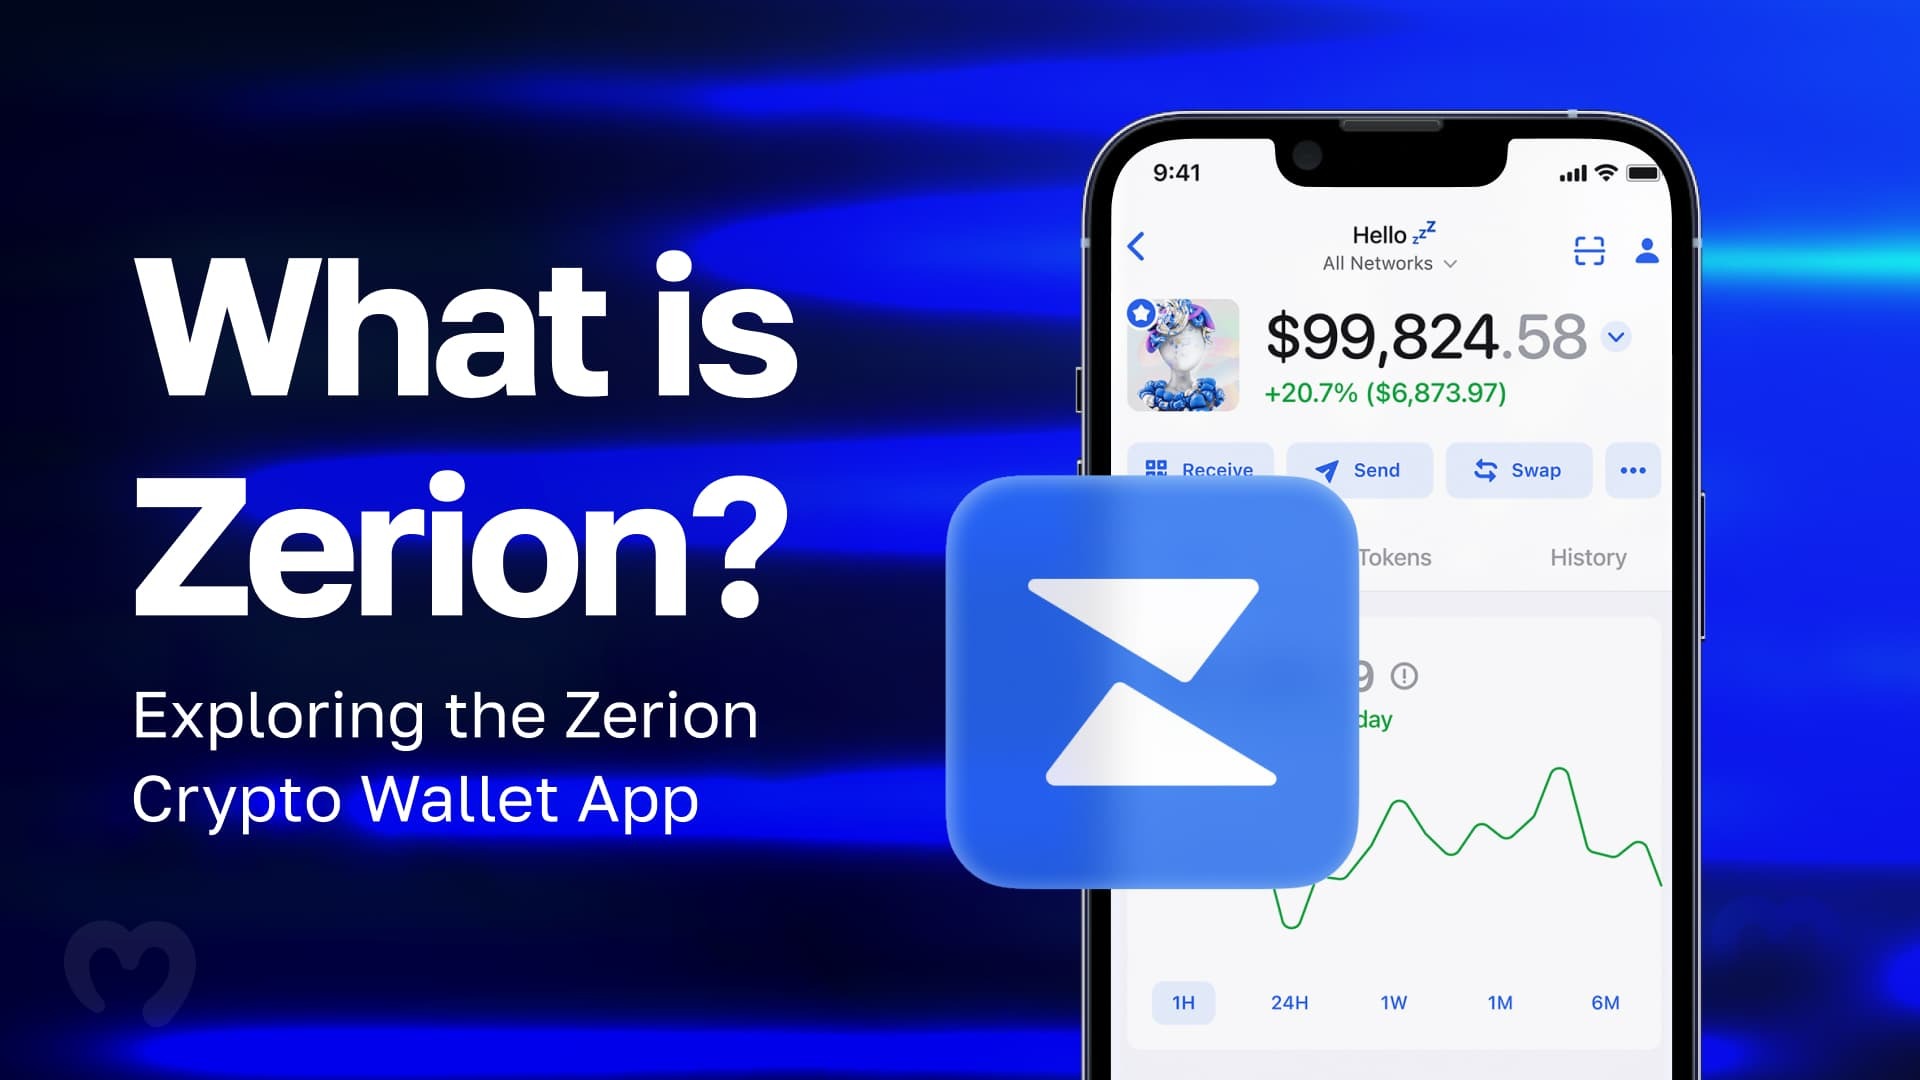 23_01_What-is-Zerion-Crypto-Wallet-App